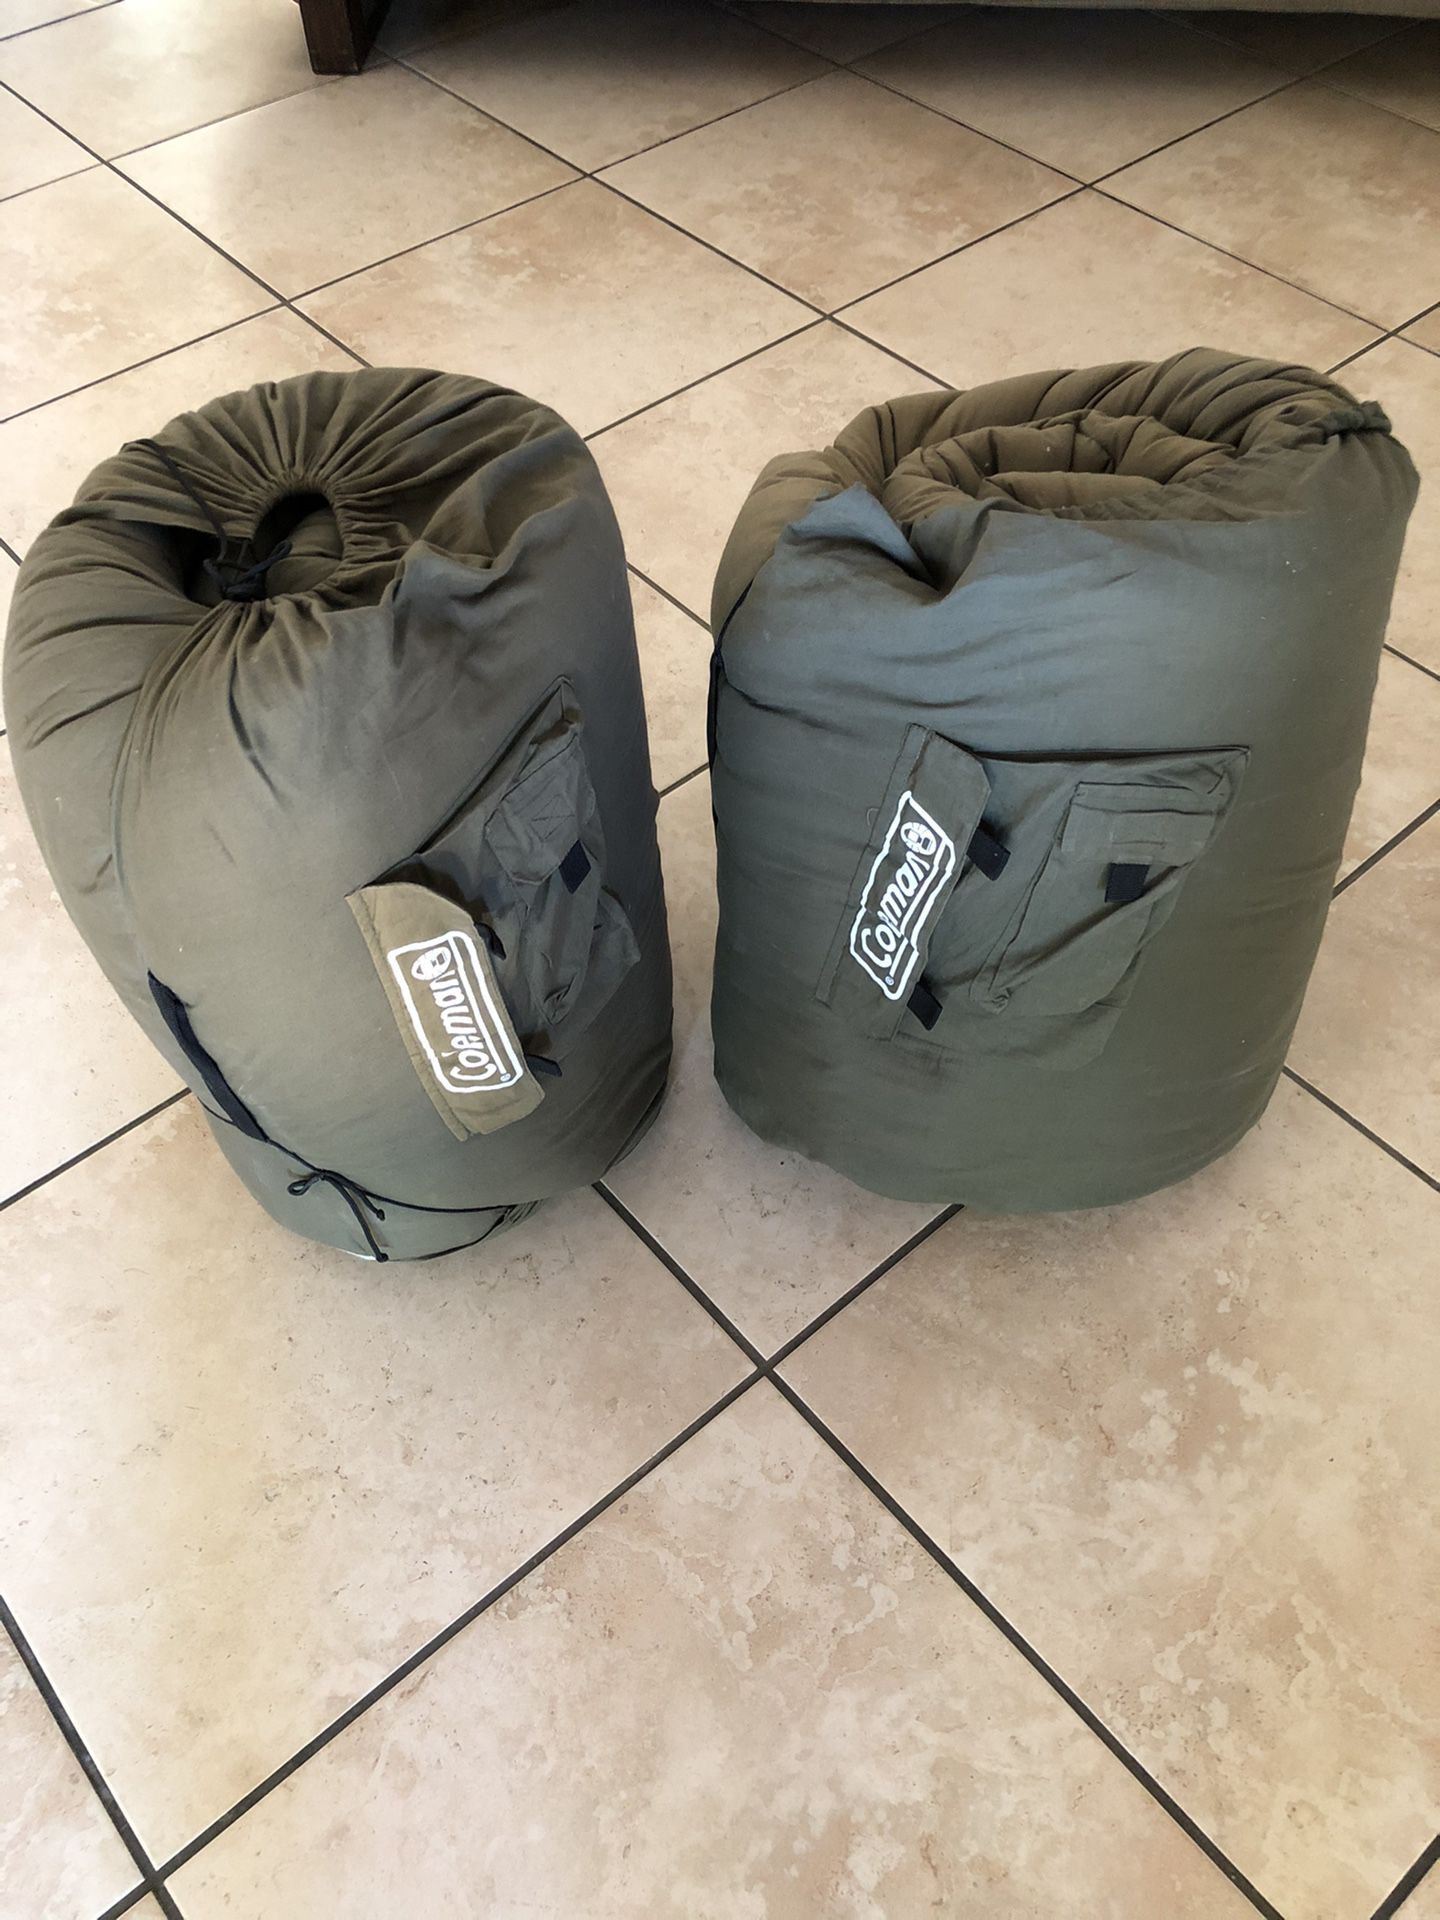 2 Coleman sleeping bags. $45 for both $25 each